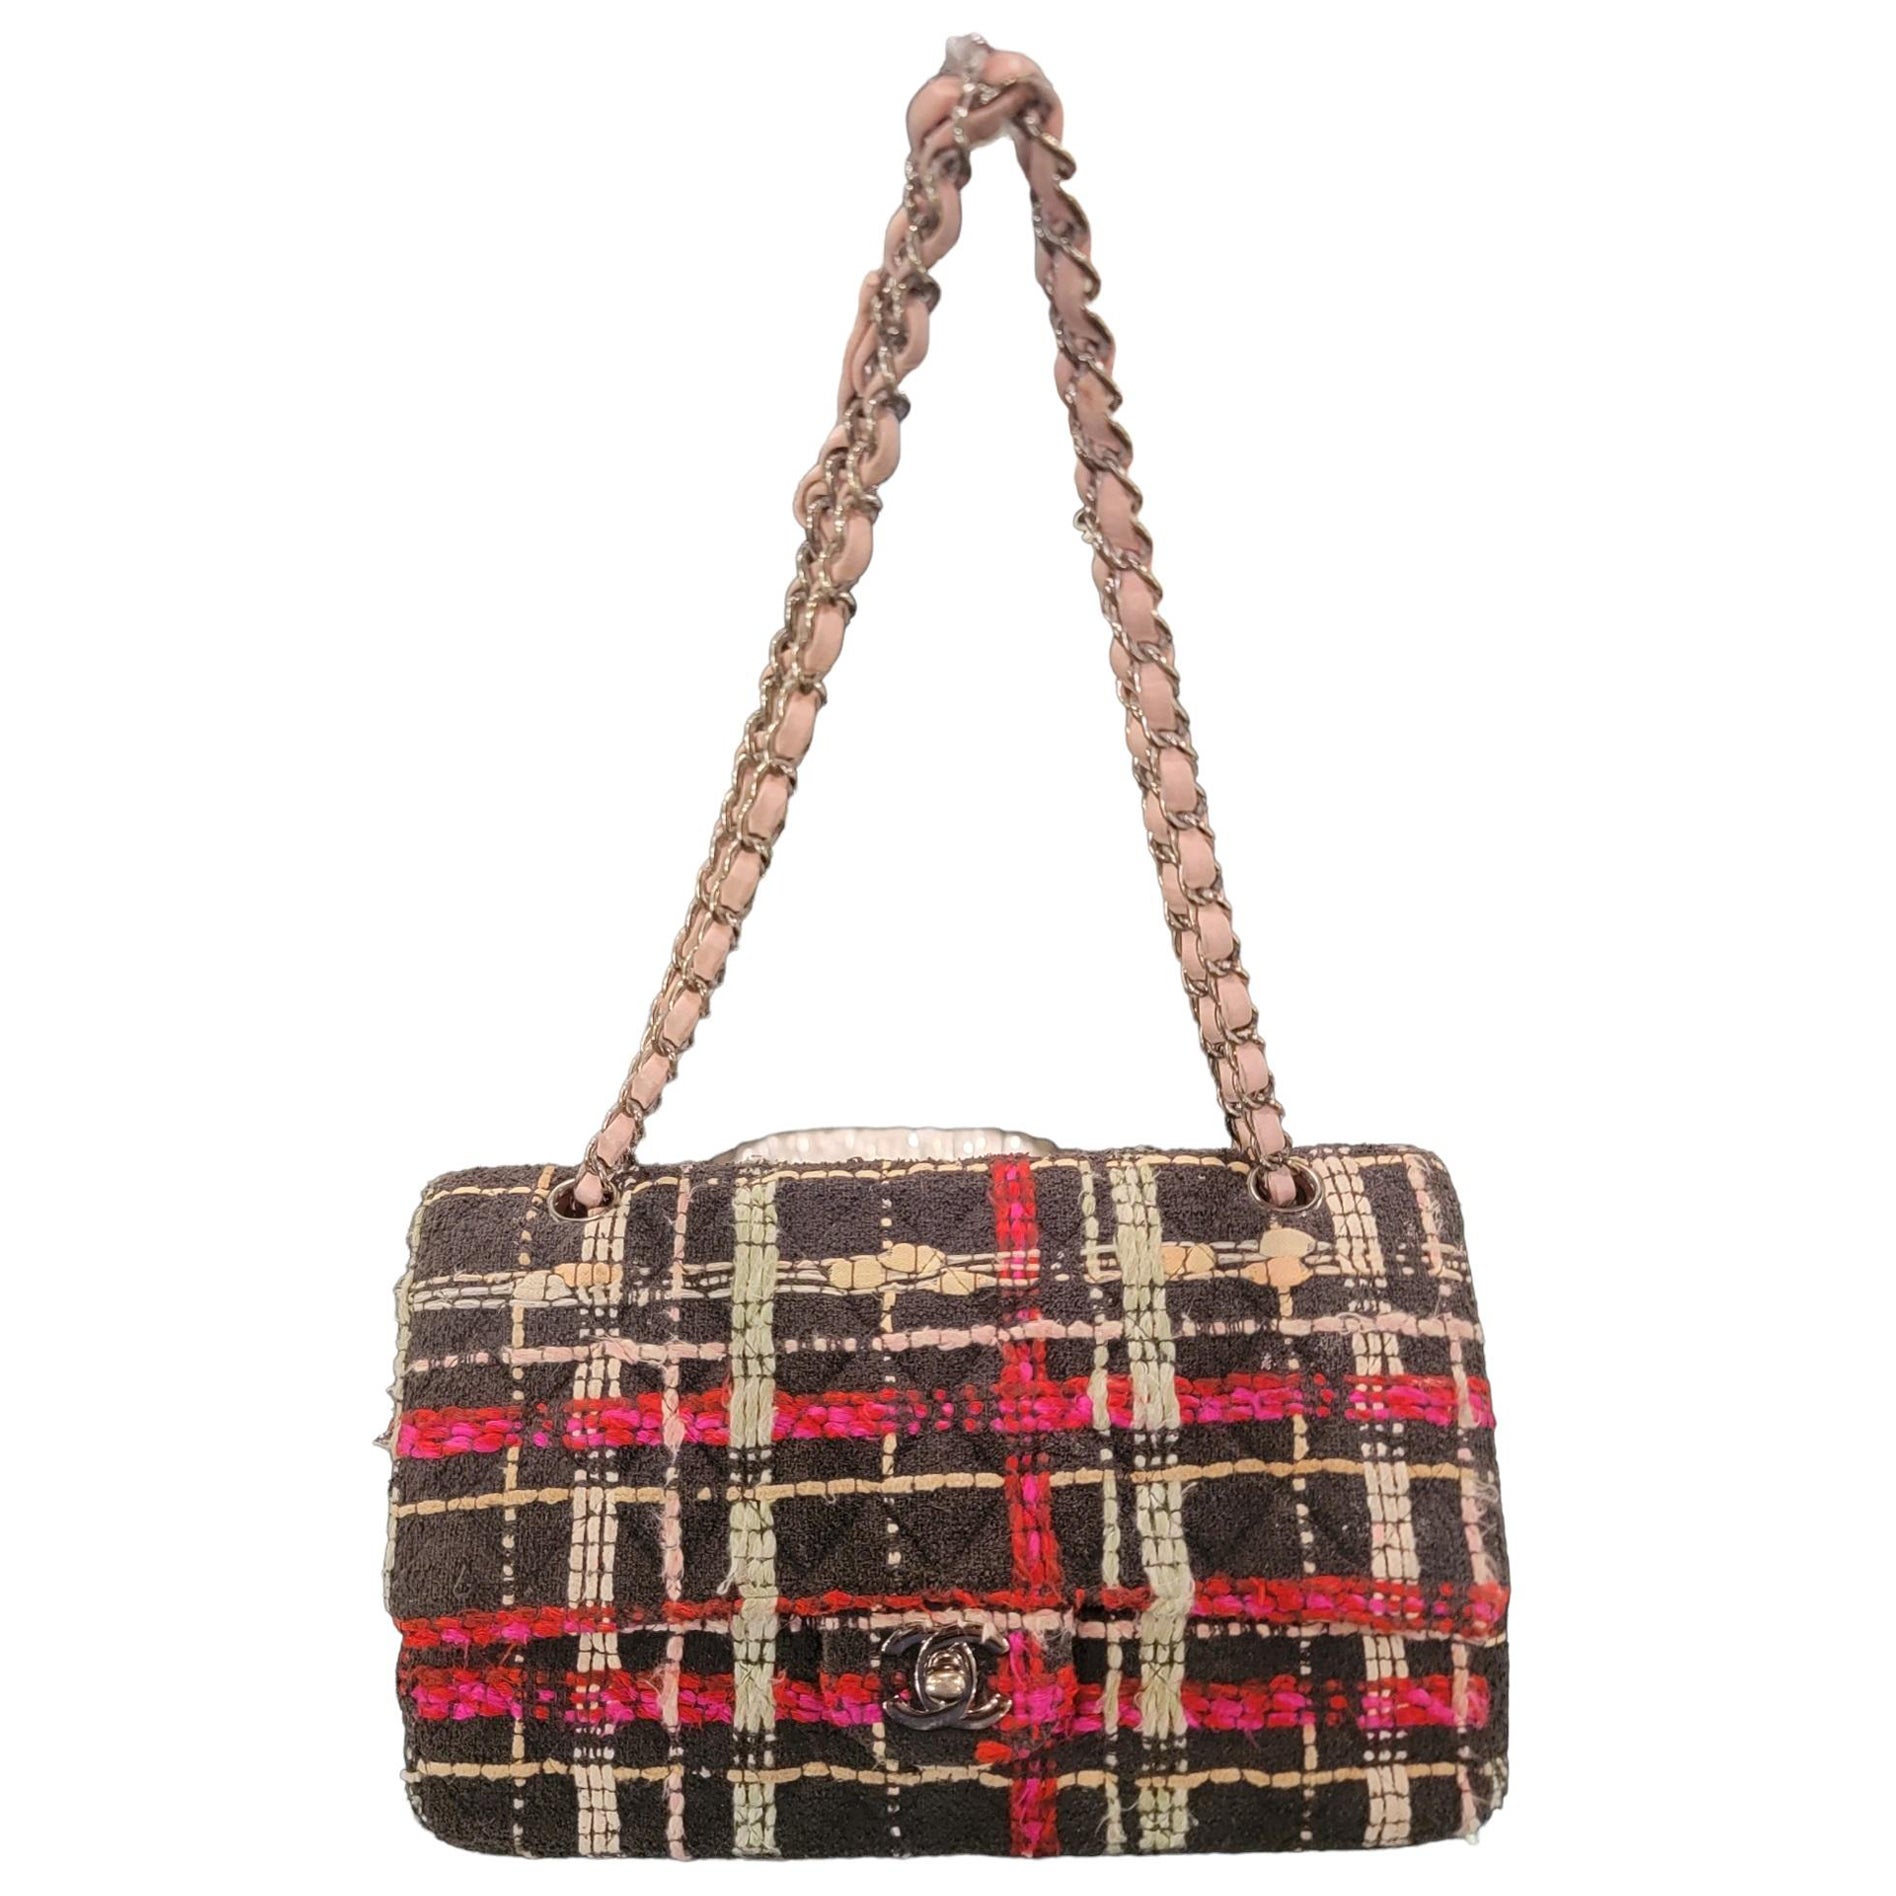 Auth Classic Chanel Runway Tweed Flap Bag For Sale